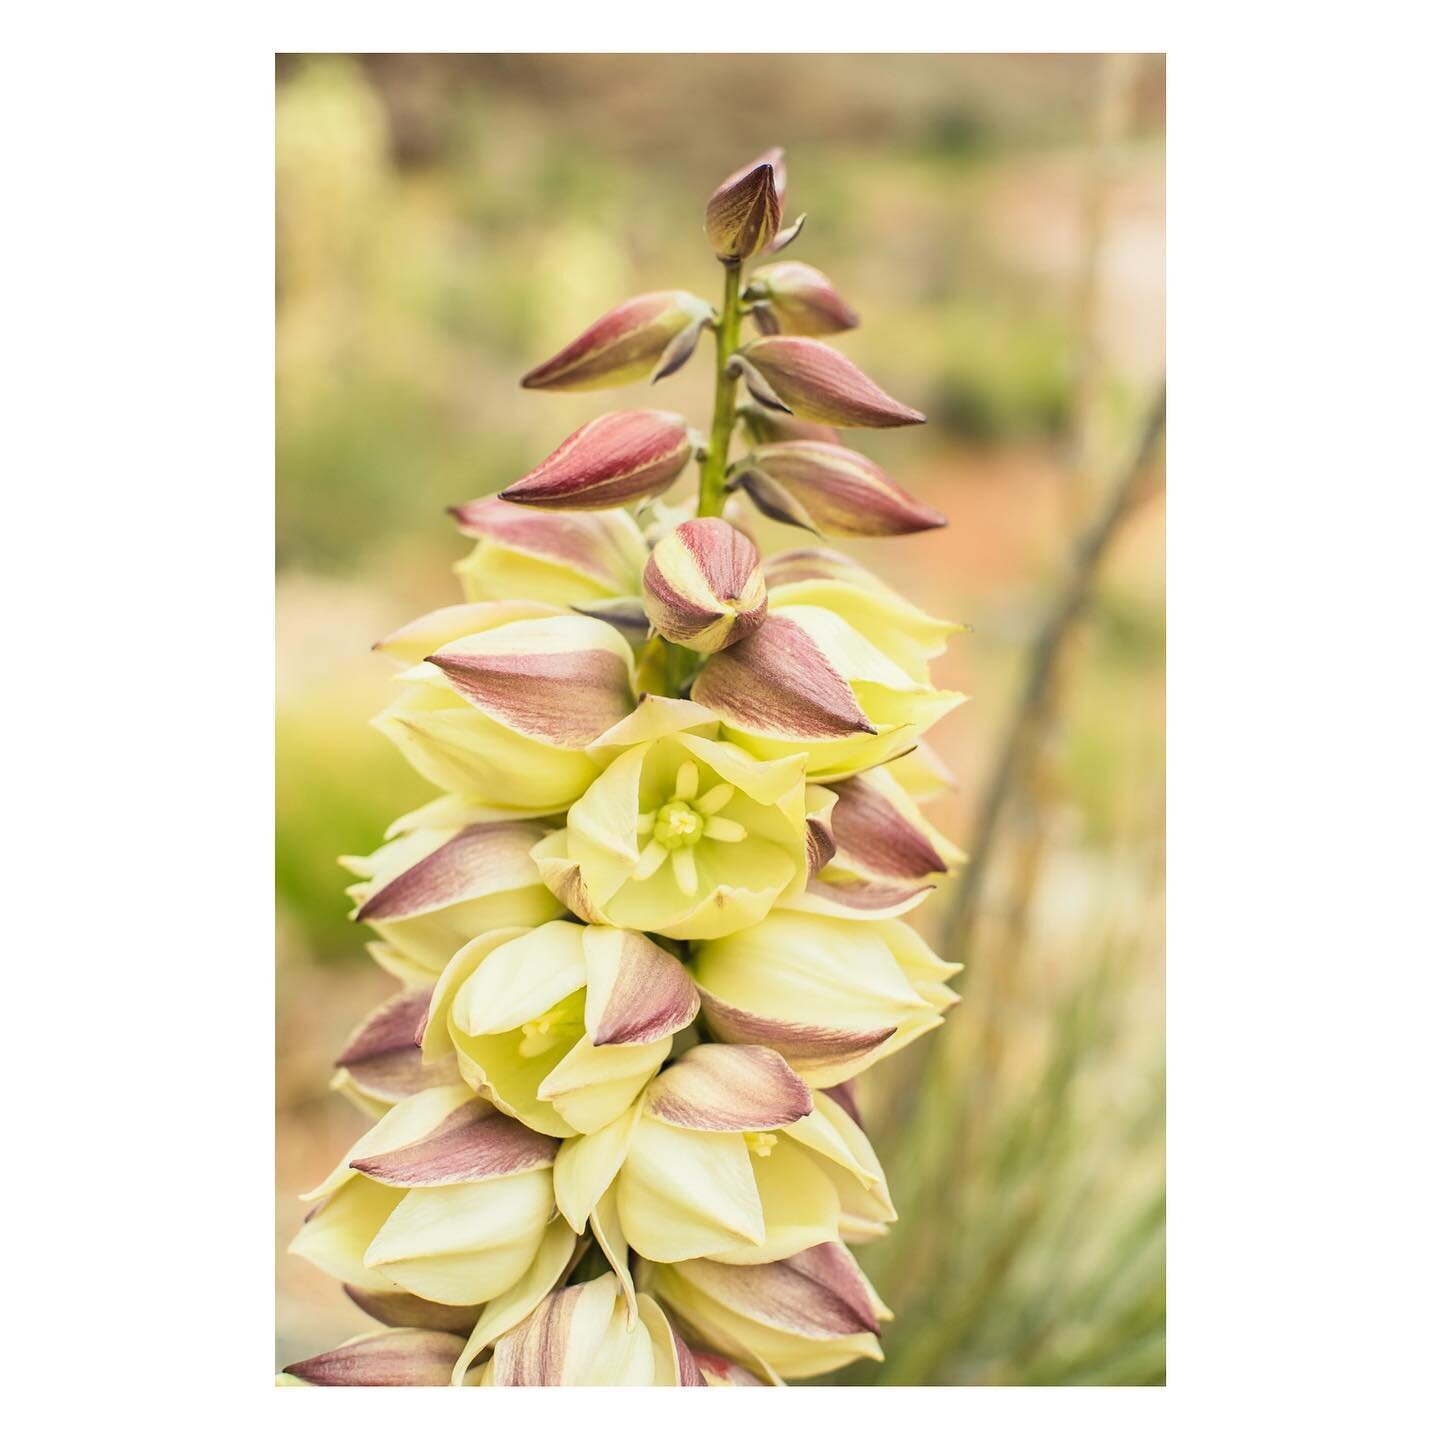 A Mother&rsquo;s Day Narrowleaf Yucca flower for you to enjoy.

#mothersday #givethegiftofflowers #flower #narrowleafyucca #desertflowers #springbloom #mamalove #giveherlotsoflove